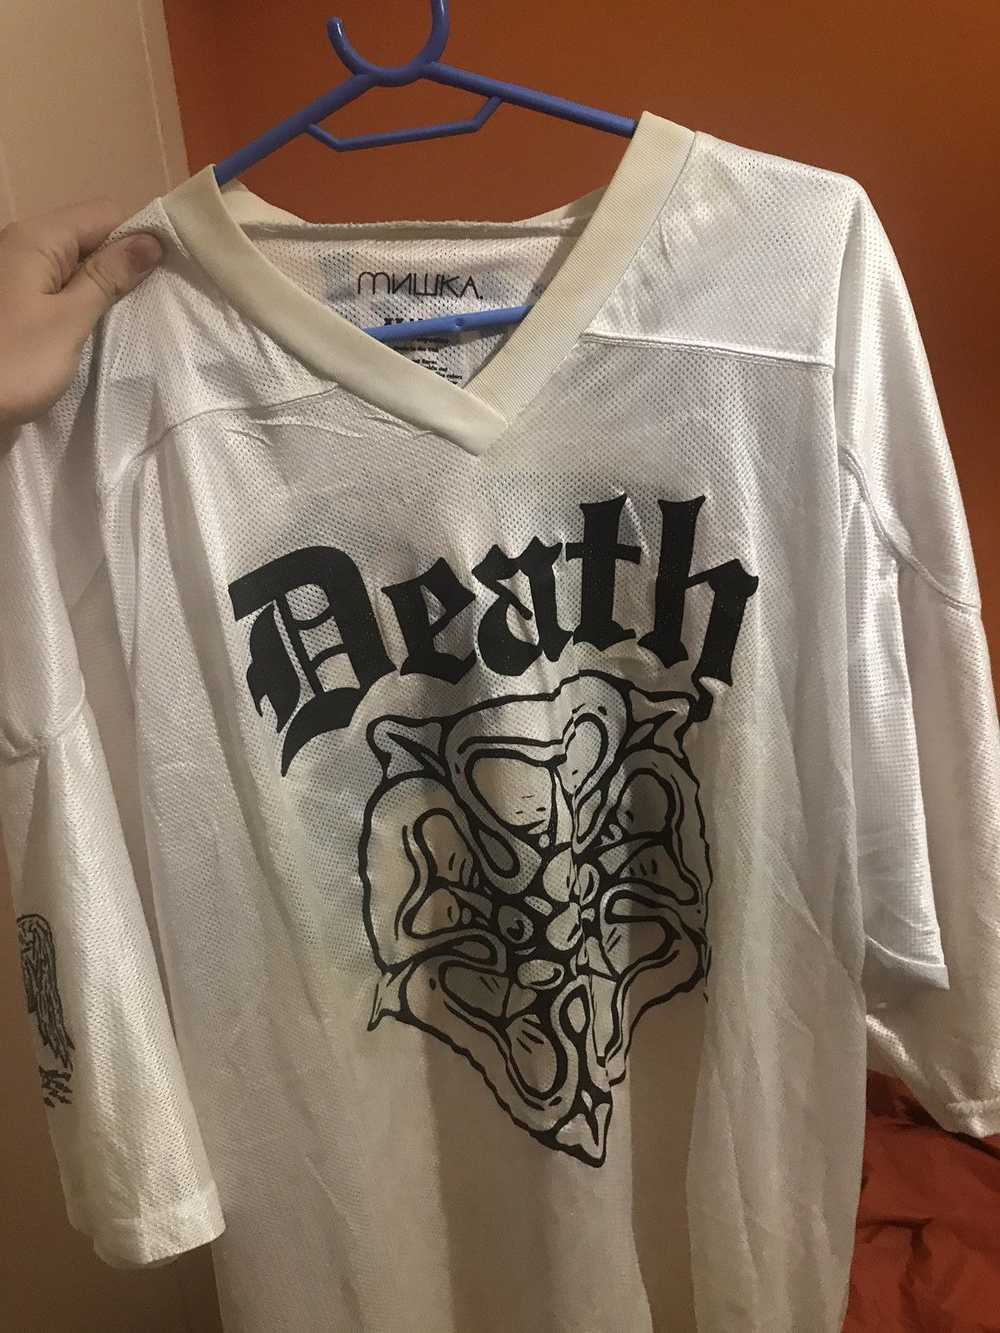 Mishka Jersey signed by Pouya,Ghoste and Fat Nick - image 3